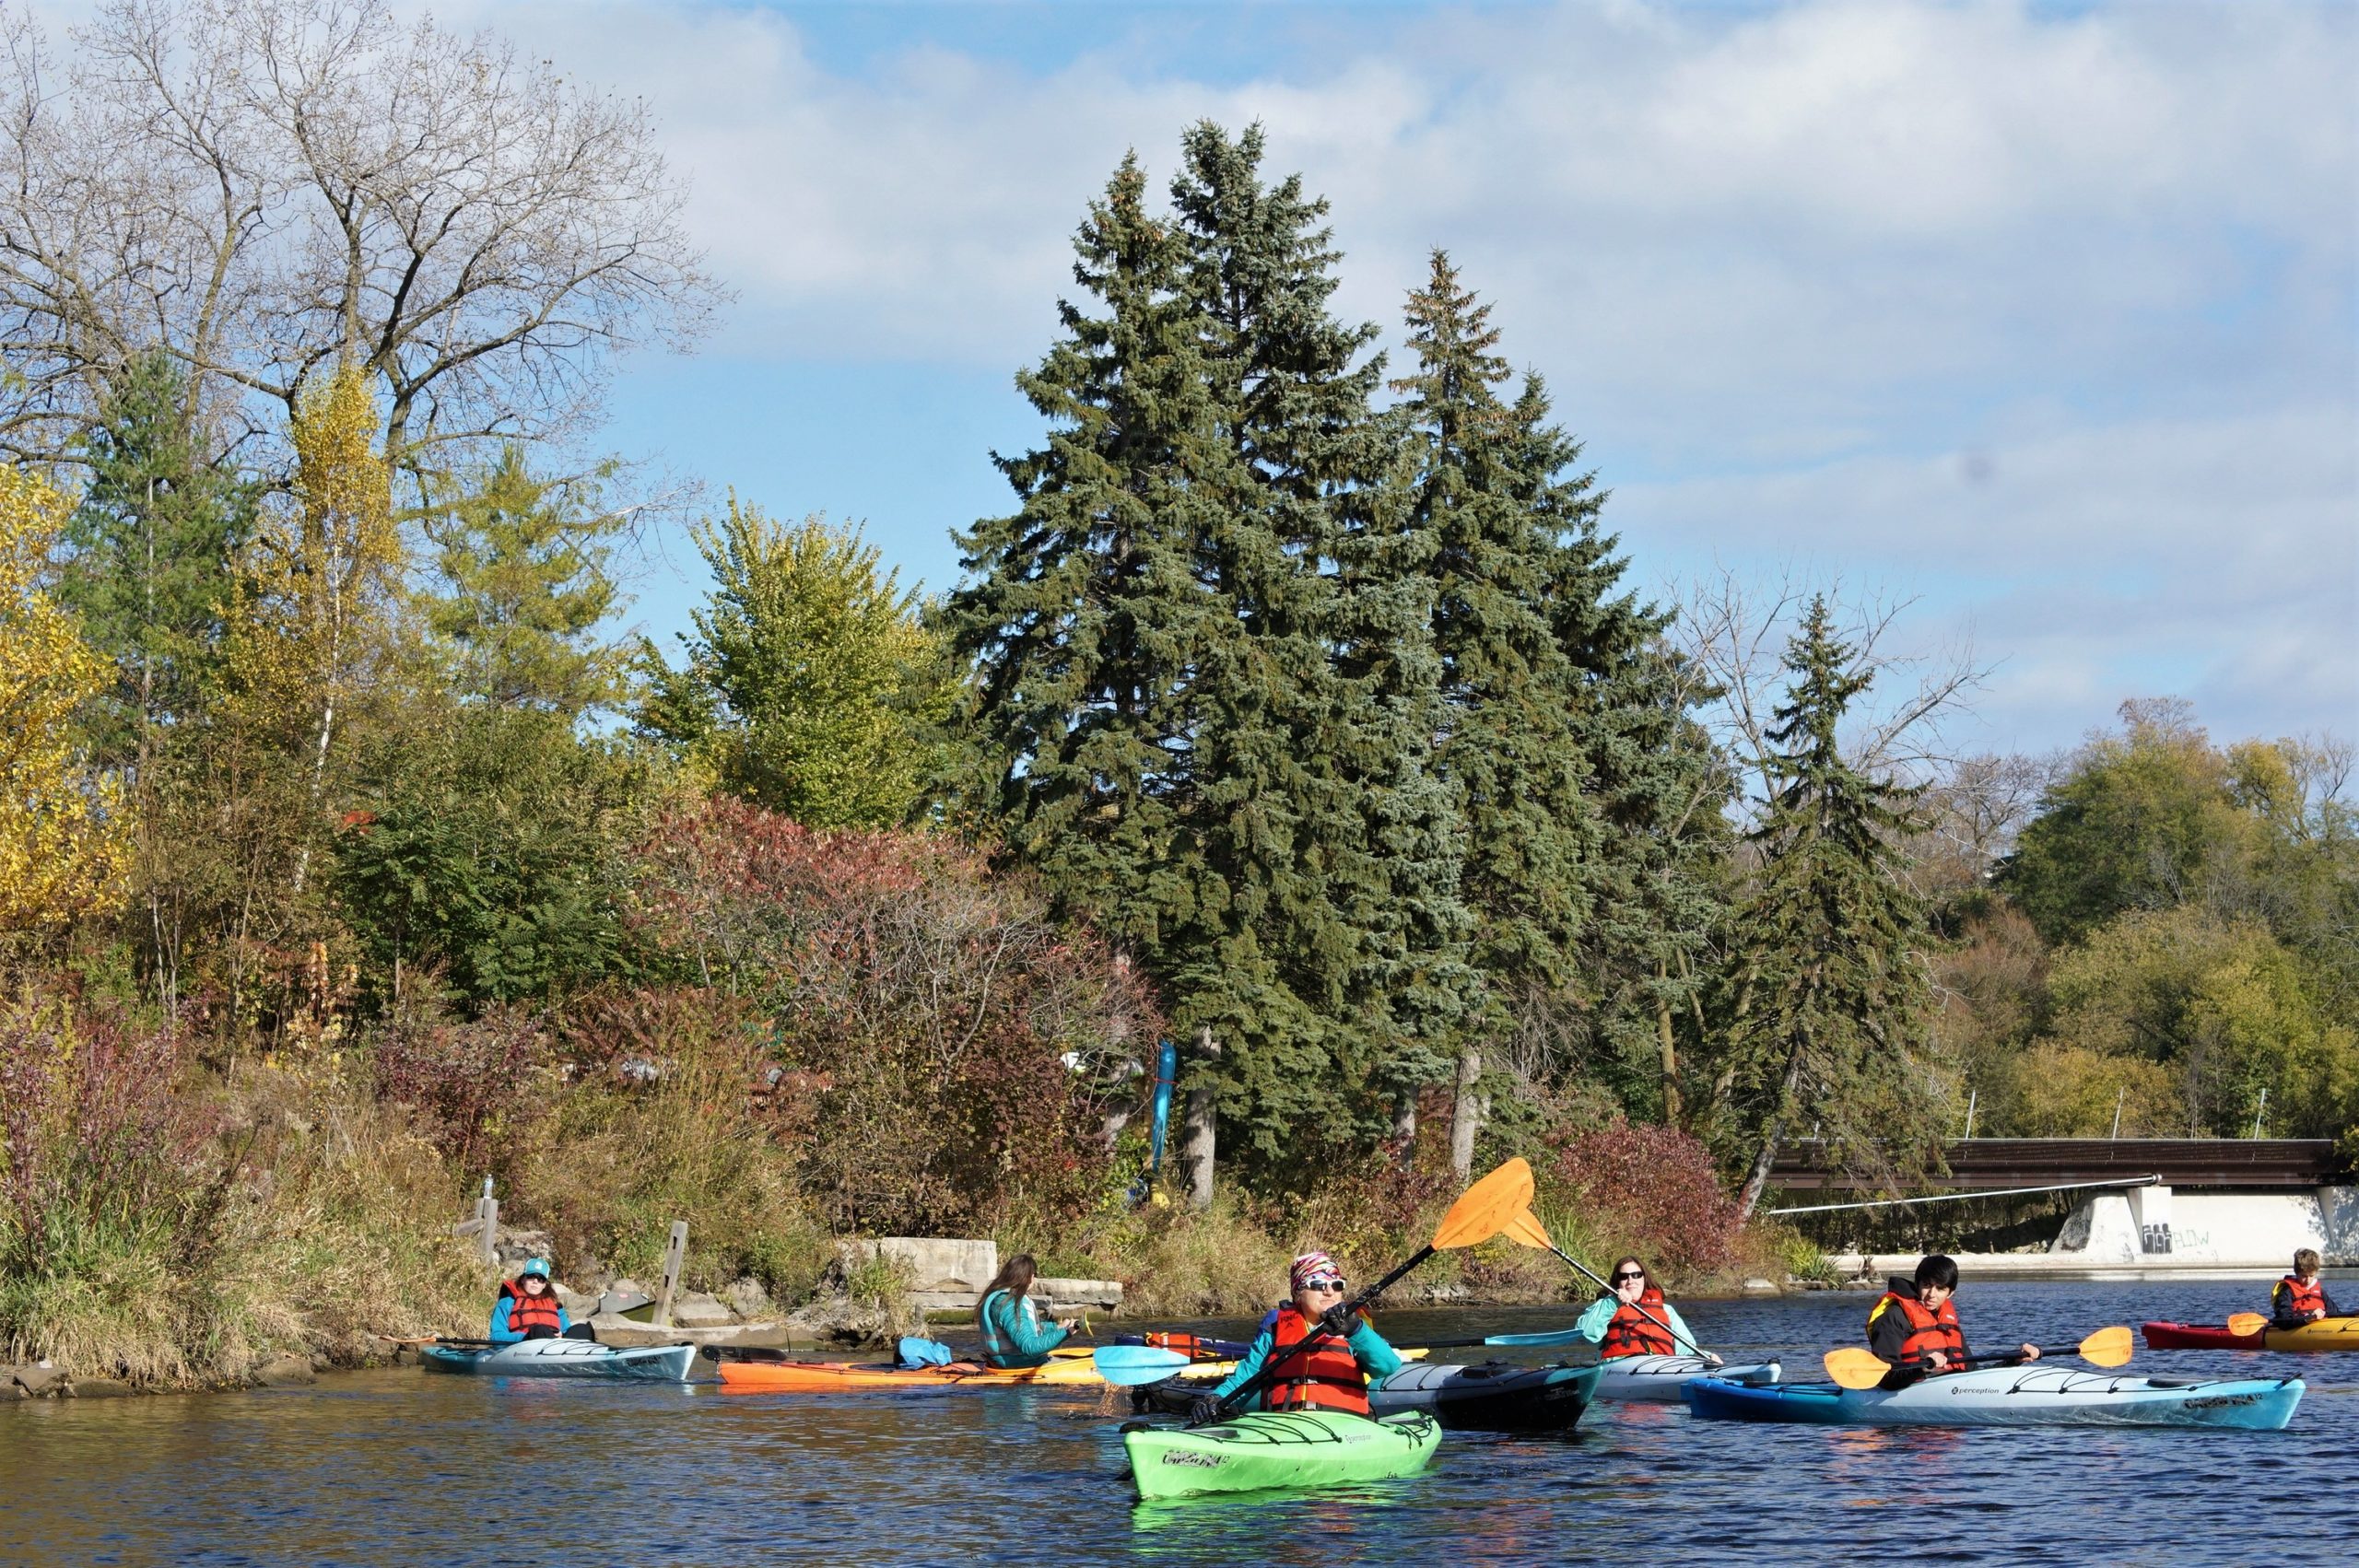 a small group of people paddling kayaks on the Milwaukee River in fall with evergreen trees in the background